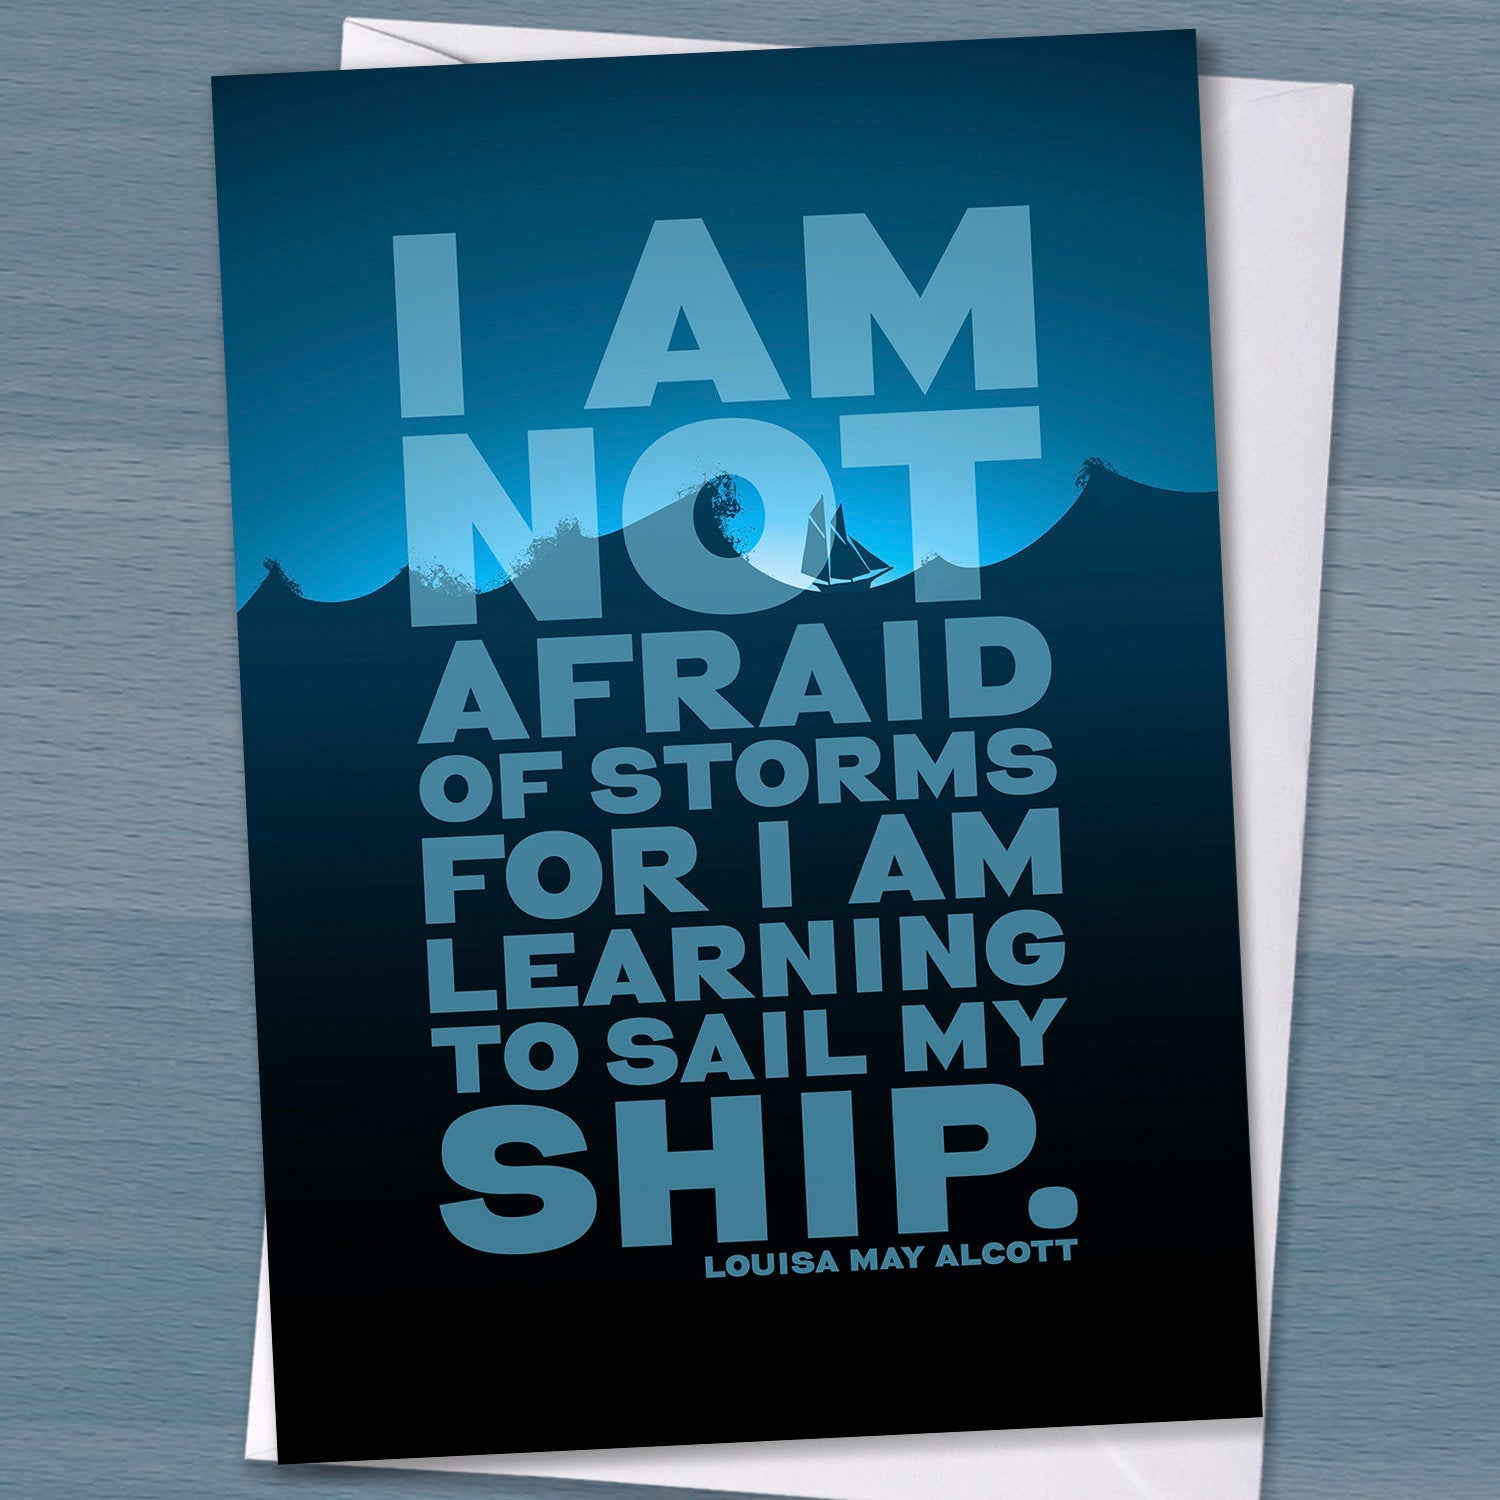 Inspirational card with sailing ship detail "I am not Afraid of Storms for I am learning to sail my ship" - Louisa May Alcott